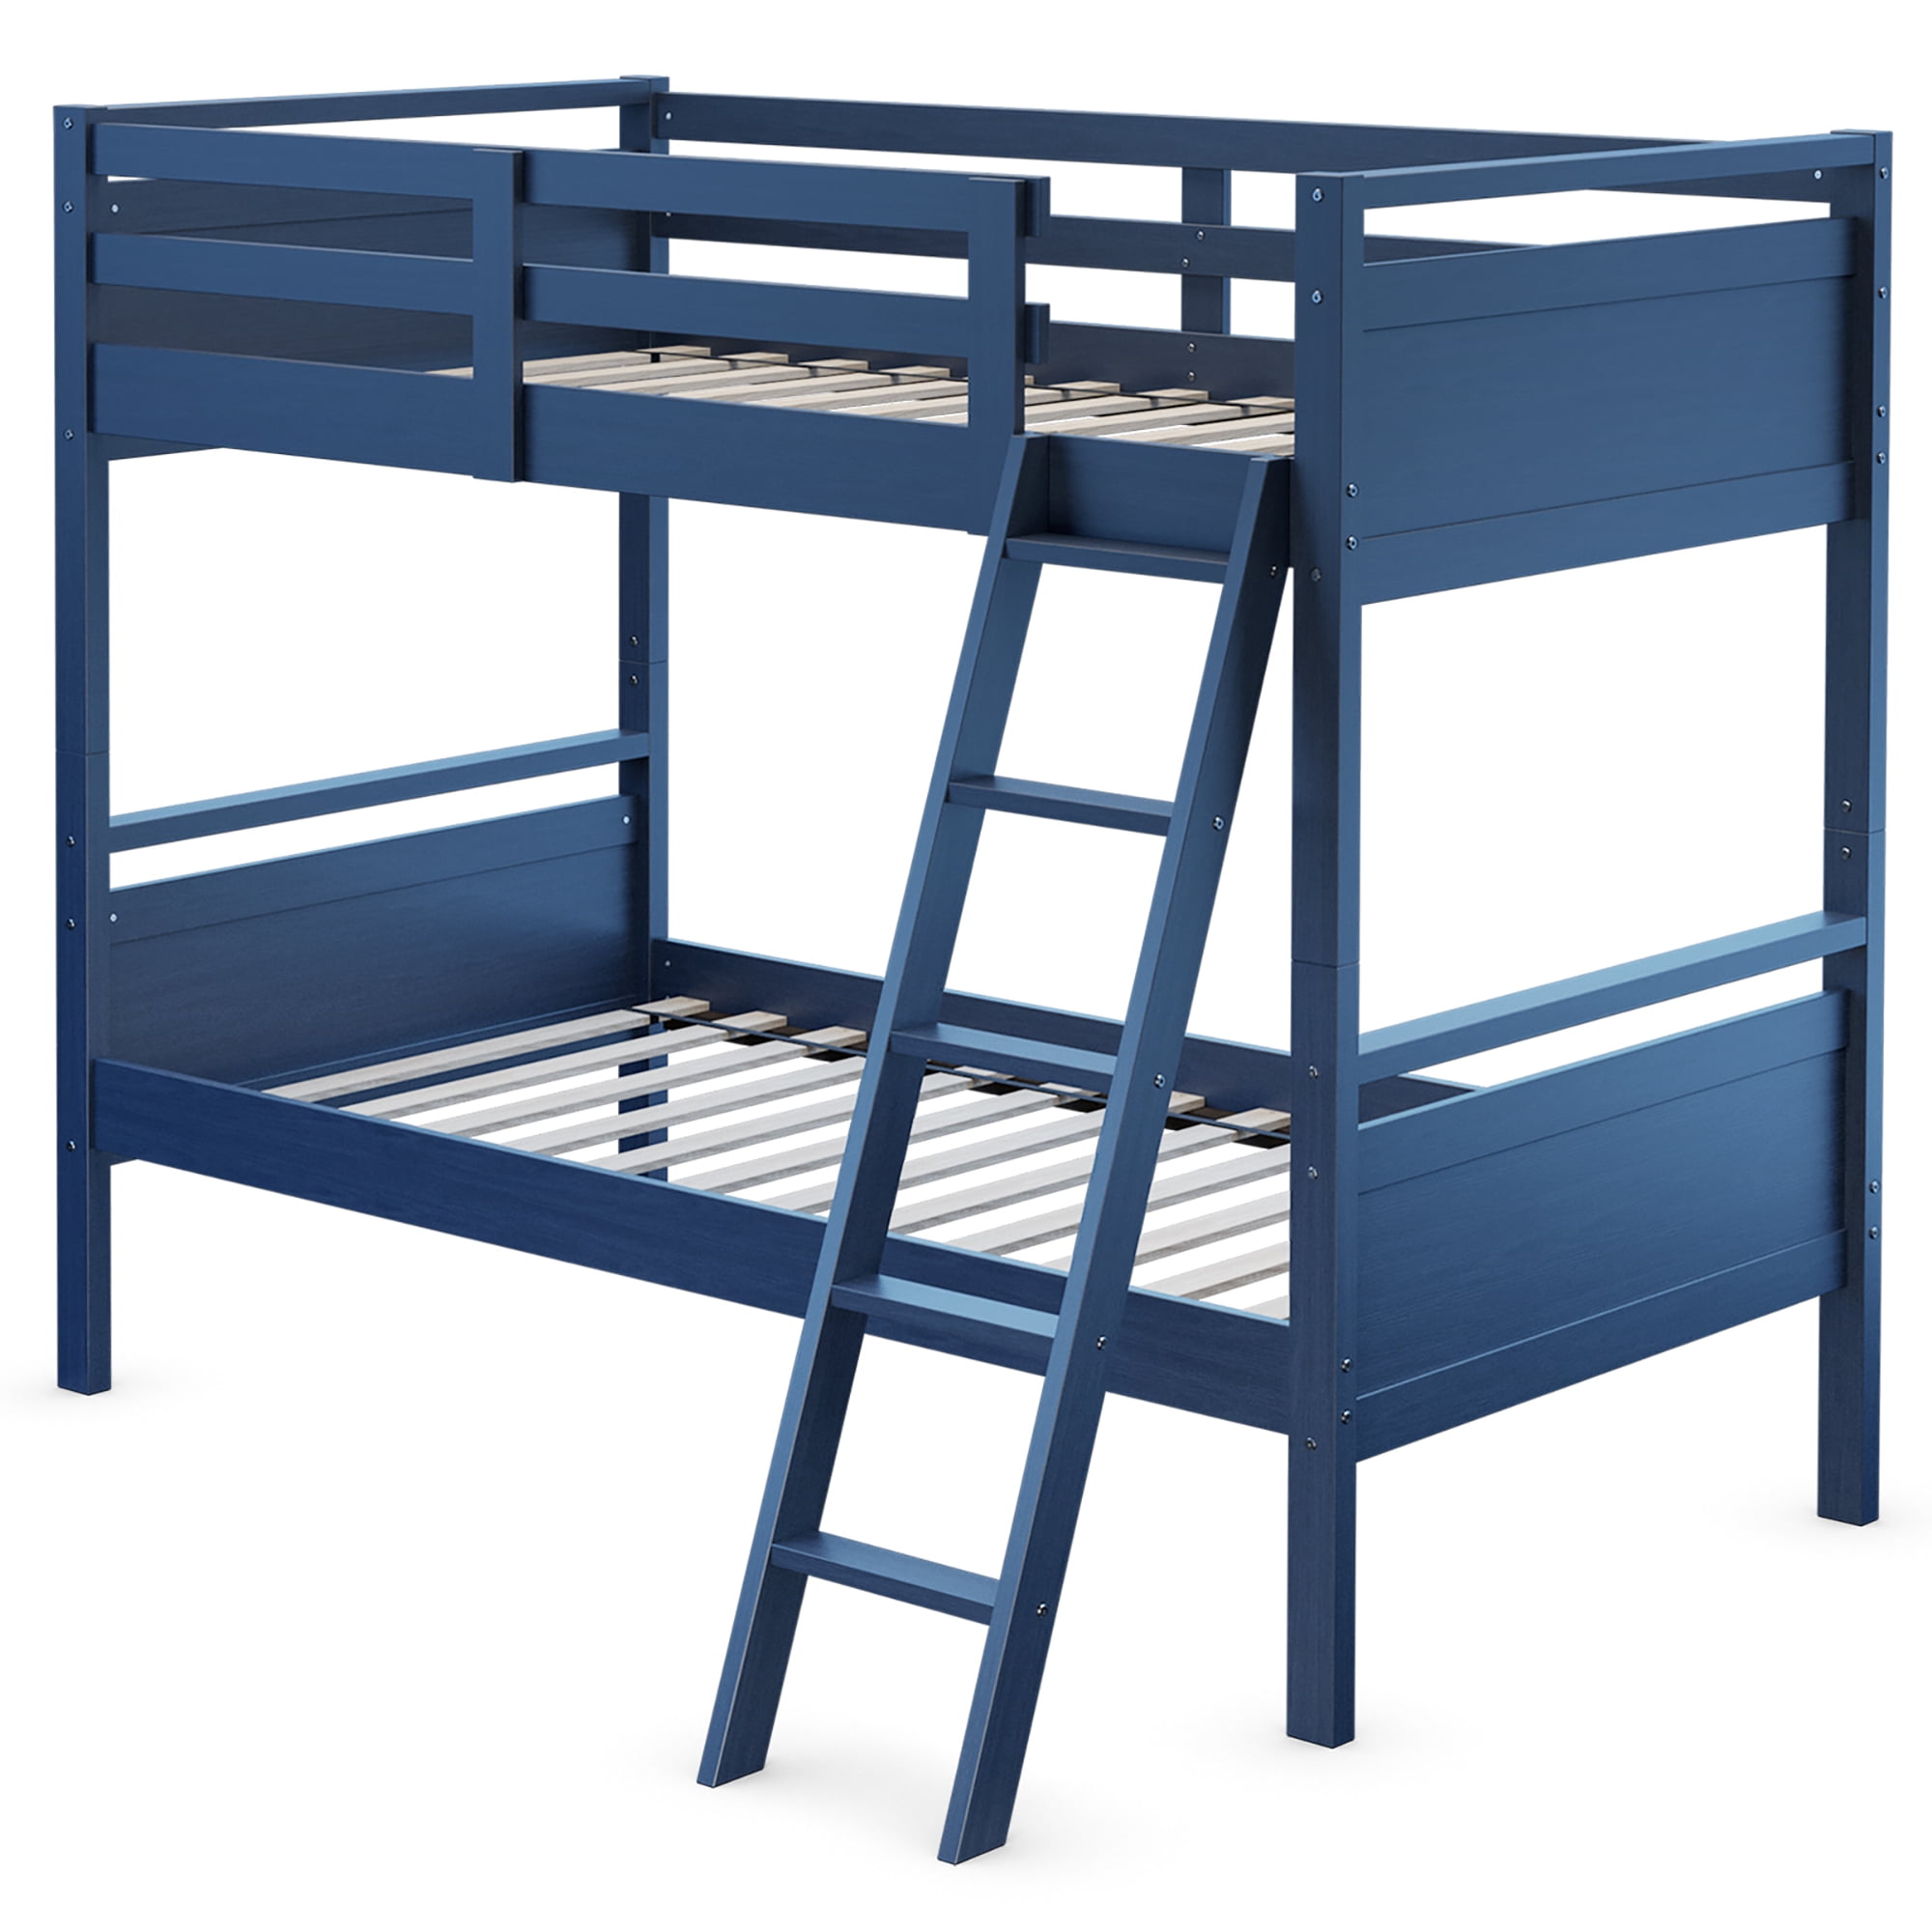 Costway Twin Over Bunk Bed Convertible 2 Individual Beds Wooden Navy, Navy Bunk Beds